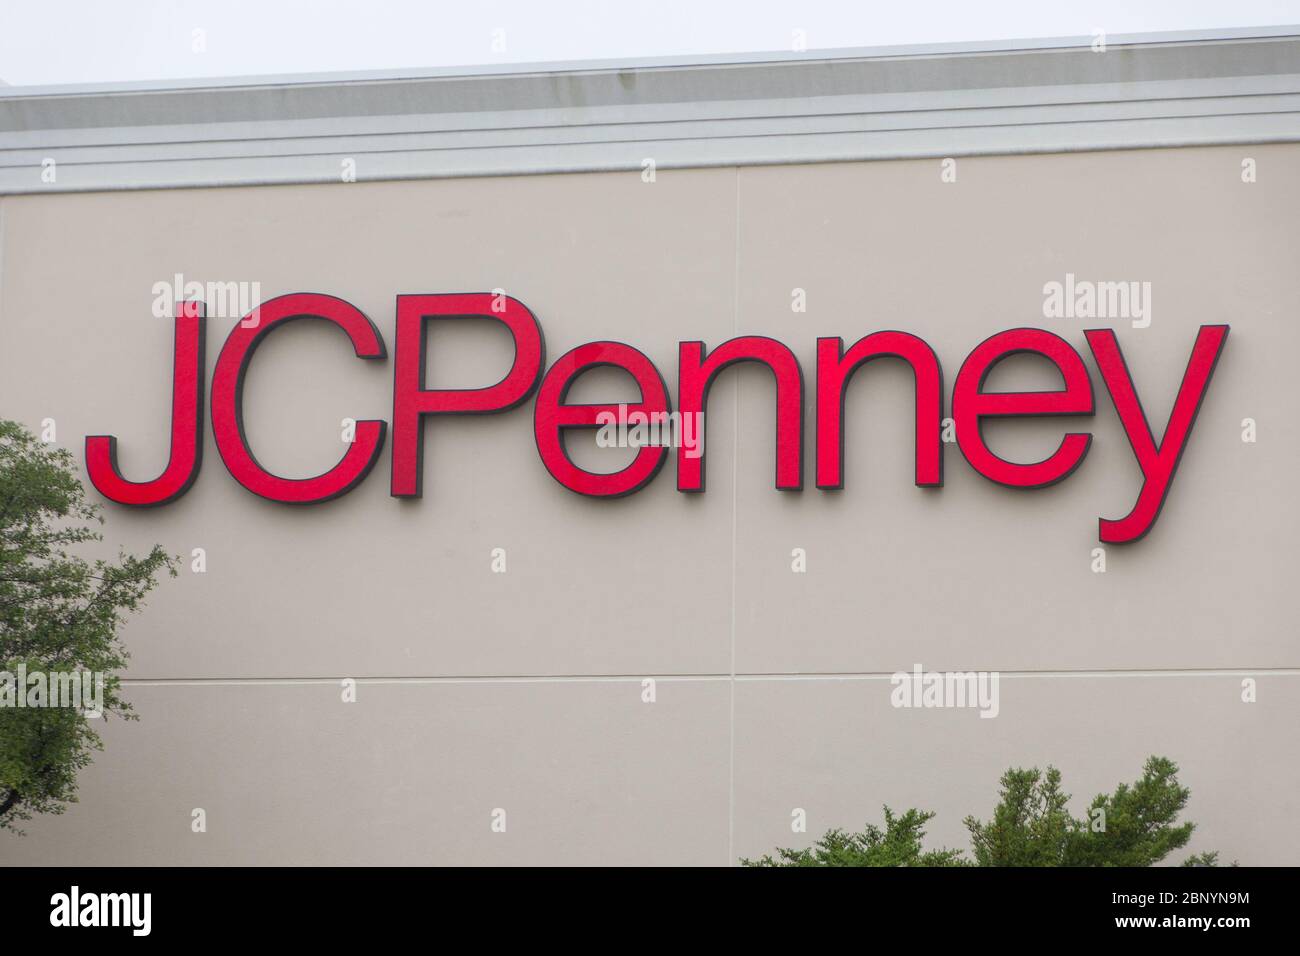 Beijing, USA. 16th May, 2020. A JC Penney store is seen closed in Frisco, Texas, the United States, on May 16, 2020. U.S. retail giant JC Penney filed for bankruptcy on Friday due to the impact of COVID-19. The company said in a statement that it had entered into a restructuring support agreement with lenders that hold around 70 percent of its first lien debt 'to reduce the company's outstanding indebtedness and strengthen its financial position.' Credit: Dan Tian/Xinhua/Alamy Live News Stock Photo